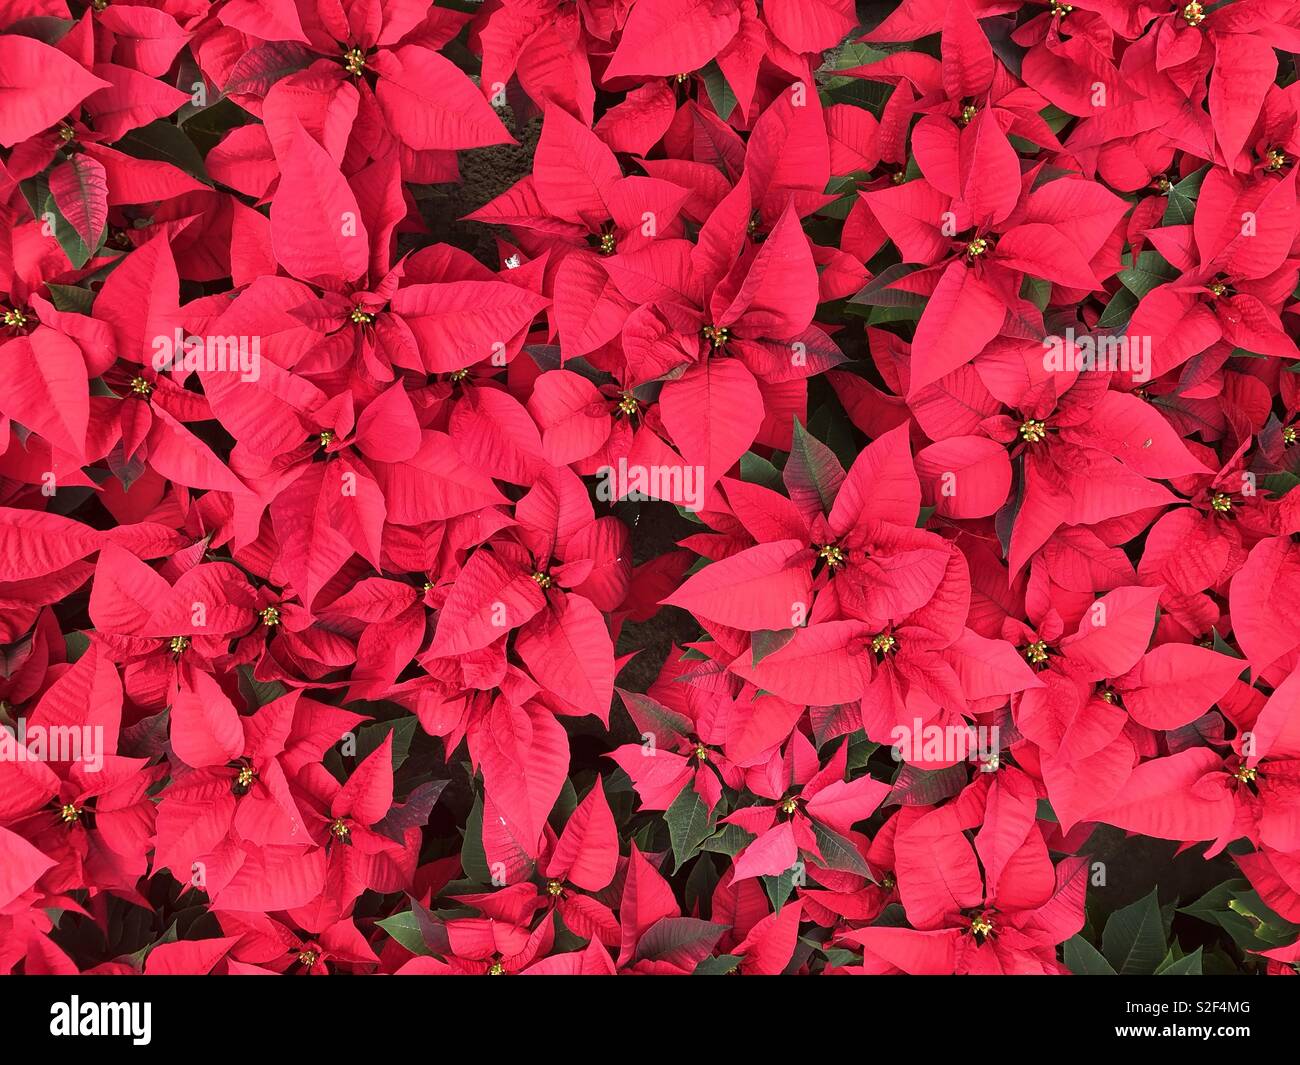 Lots of poinsettia plants from above Stock Photo